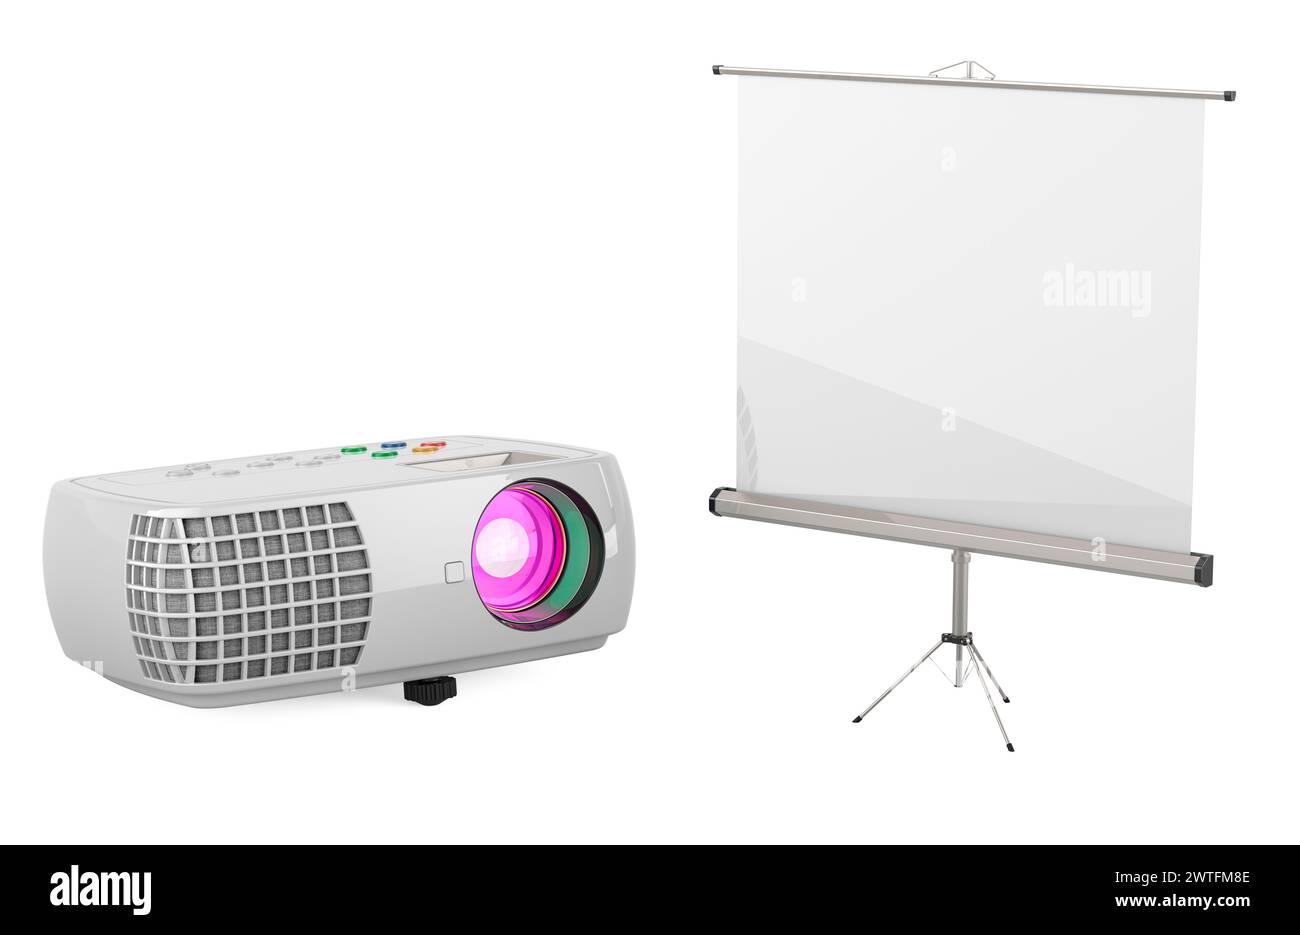 Projector with projector screen, 3D rendering isolated on white background Stock Photo